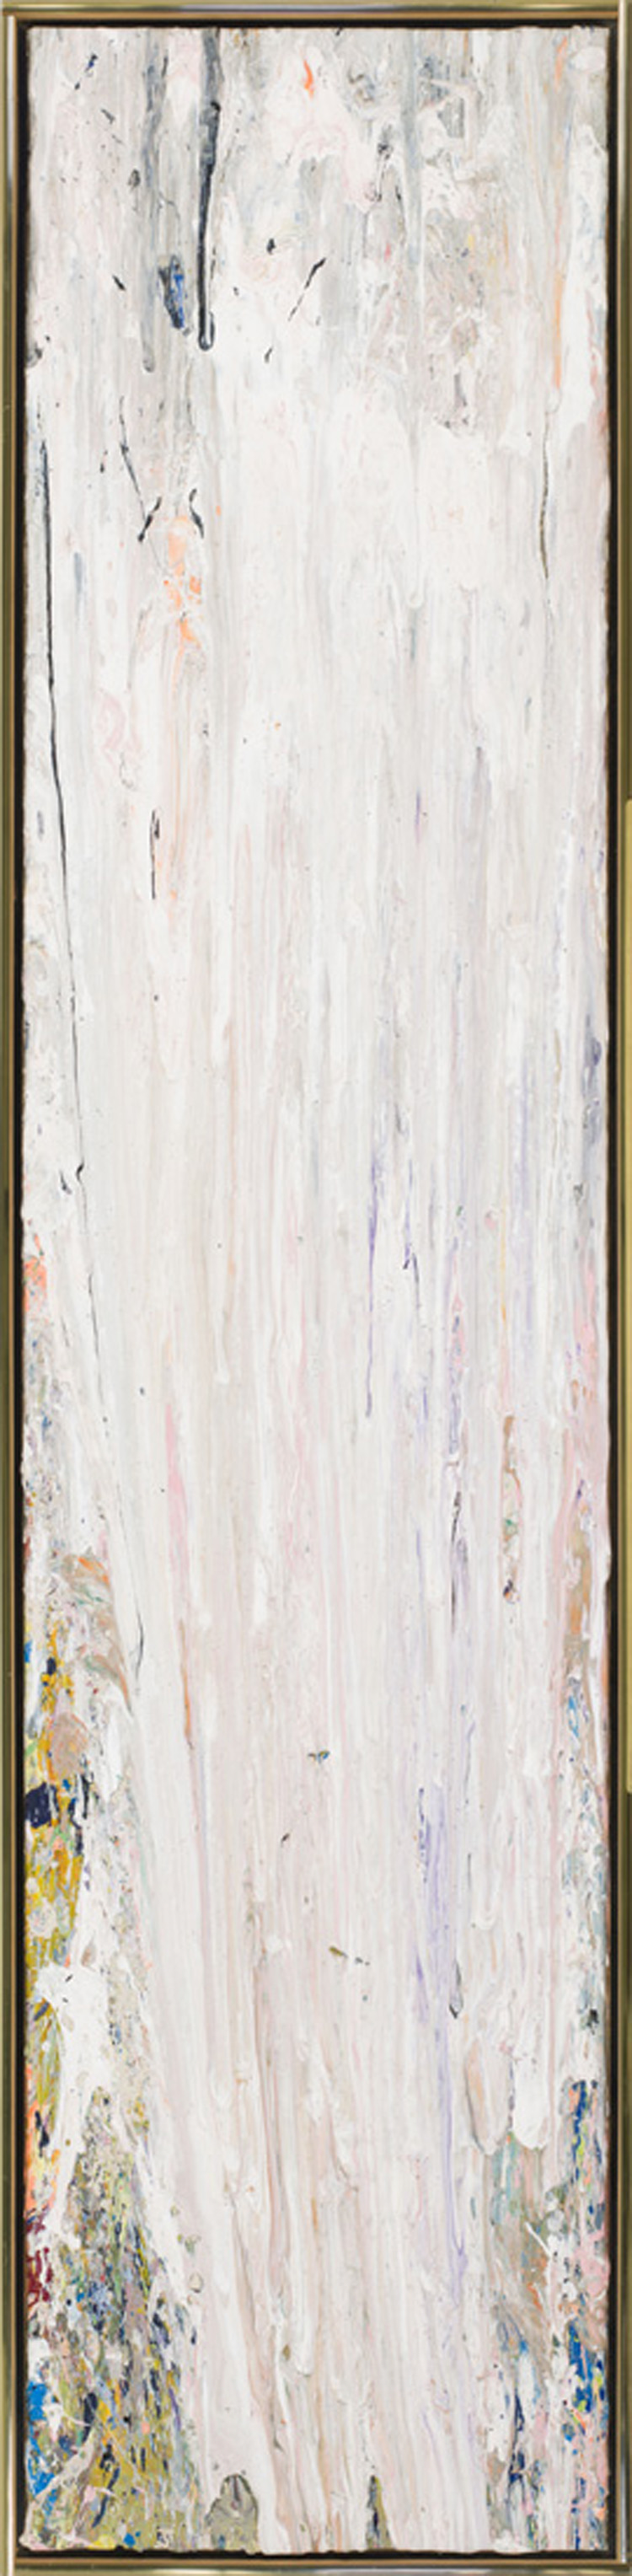 Souther by Lawrence (Larry) Poons